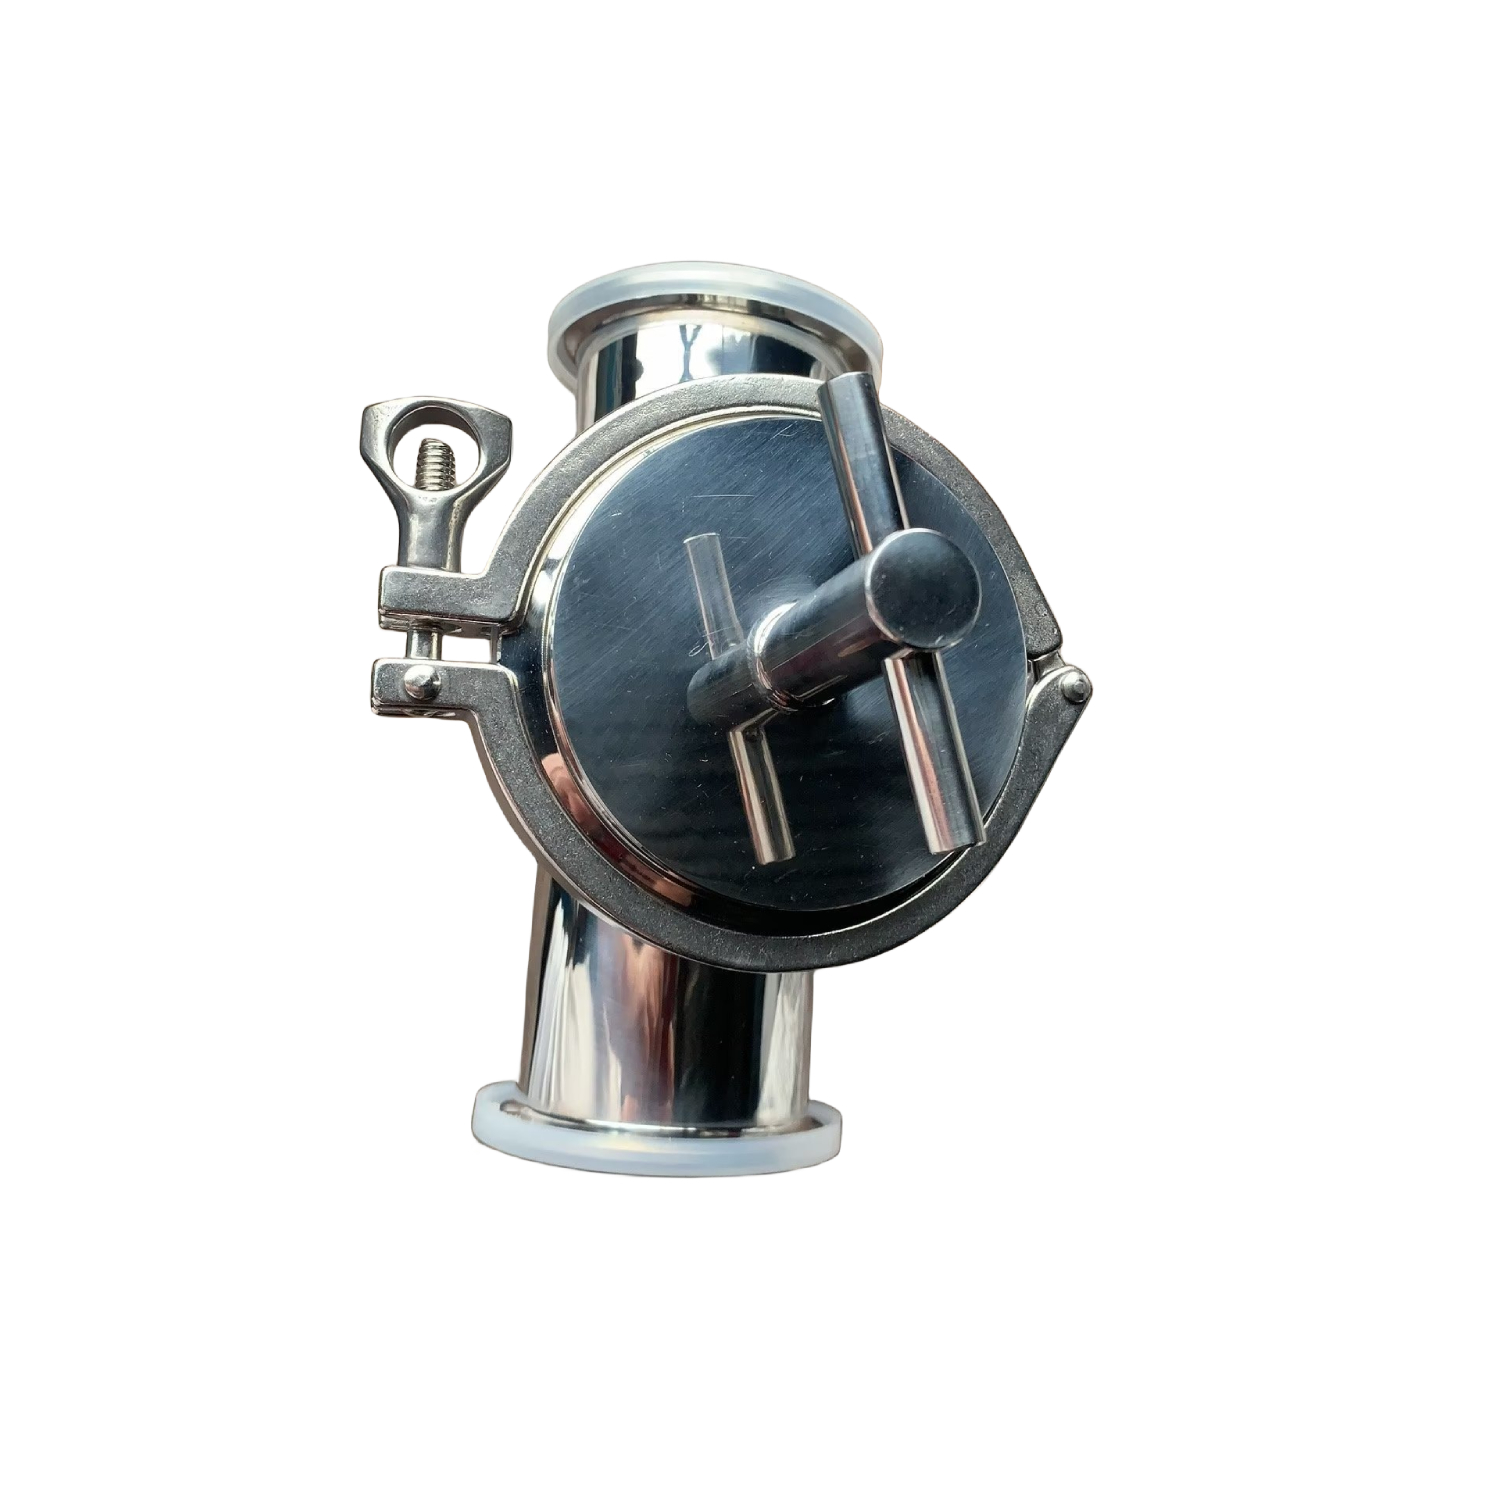 Stainless Steel SS304 Hygienic Grade High Flow Quick Open Type Clamp Magnetic Filter for Filtering Drinking